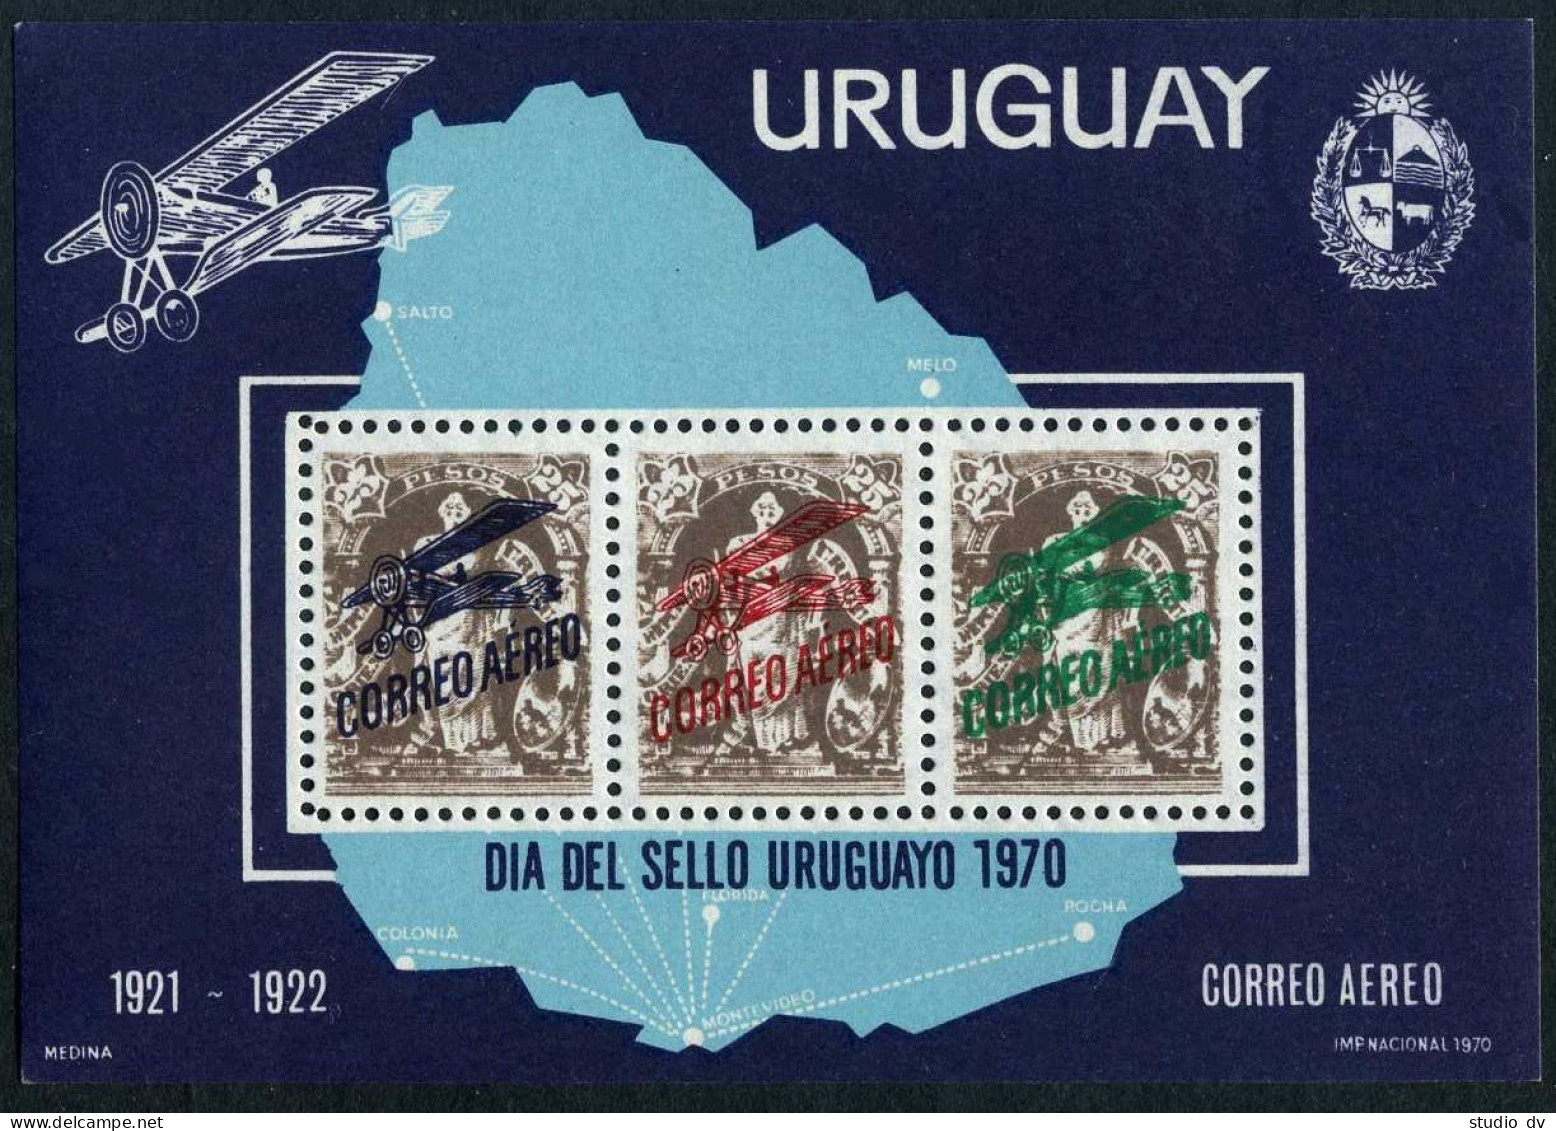 Uruguay C375, MNH. Mi 1181-1183 Bl.13. Stamp Day 1970: First Air Post Issue. - Uruguay